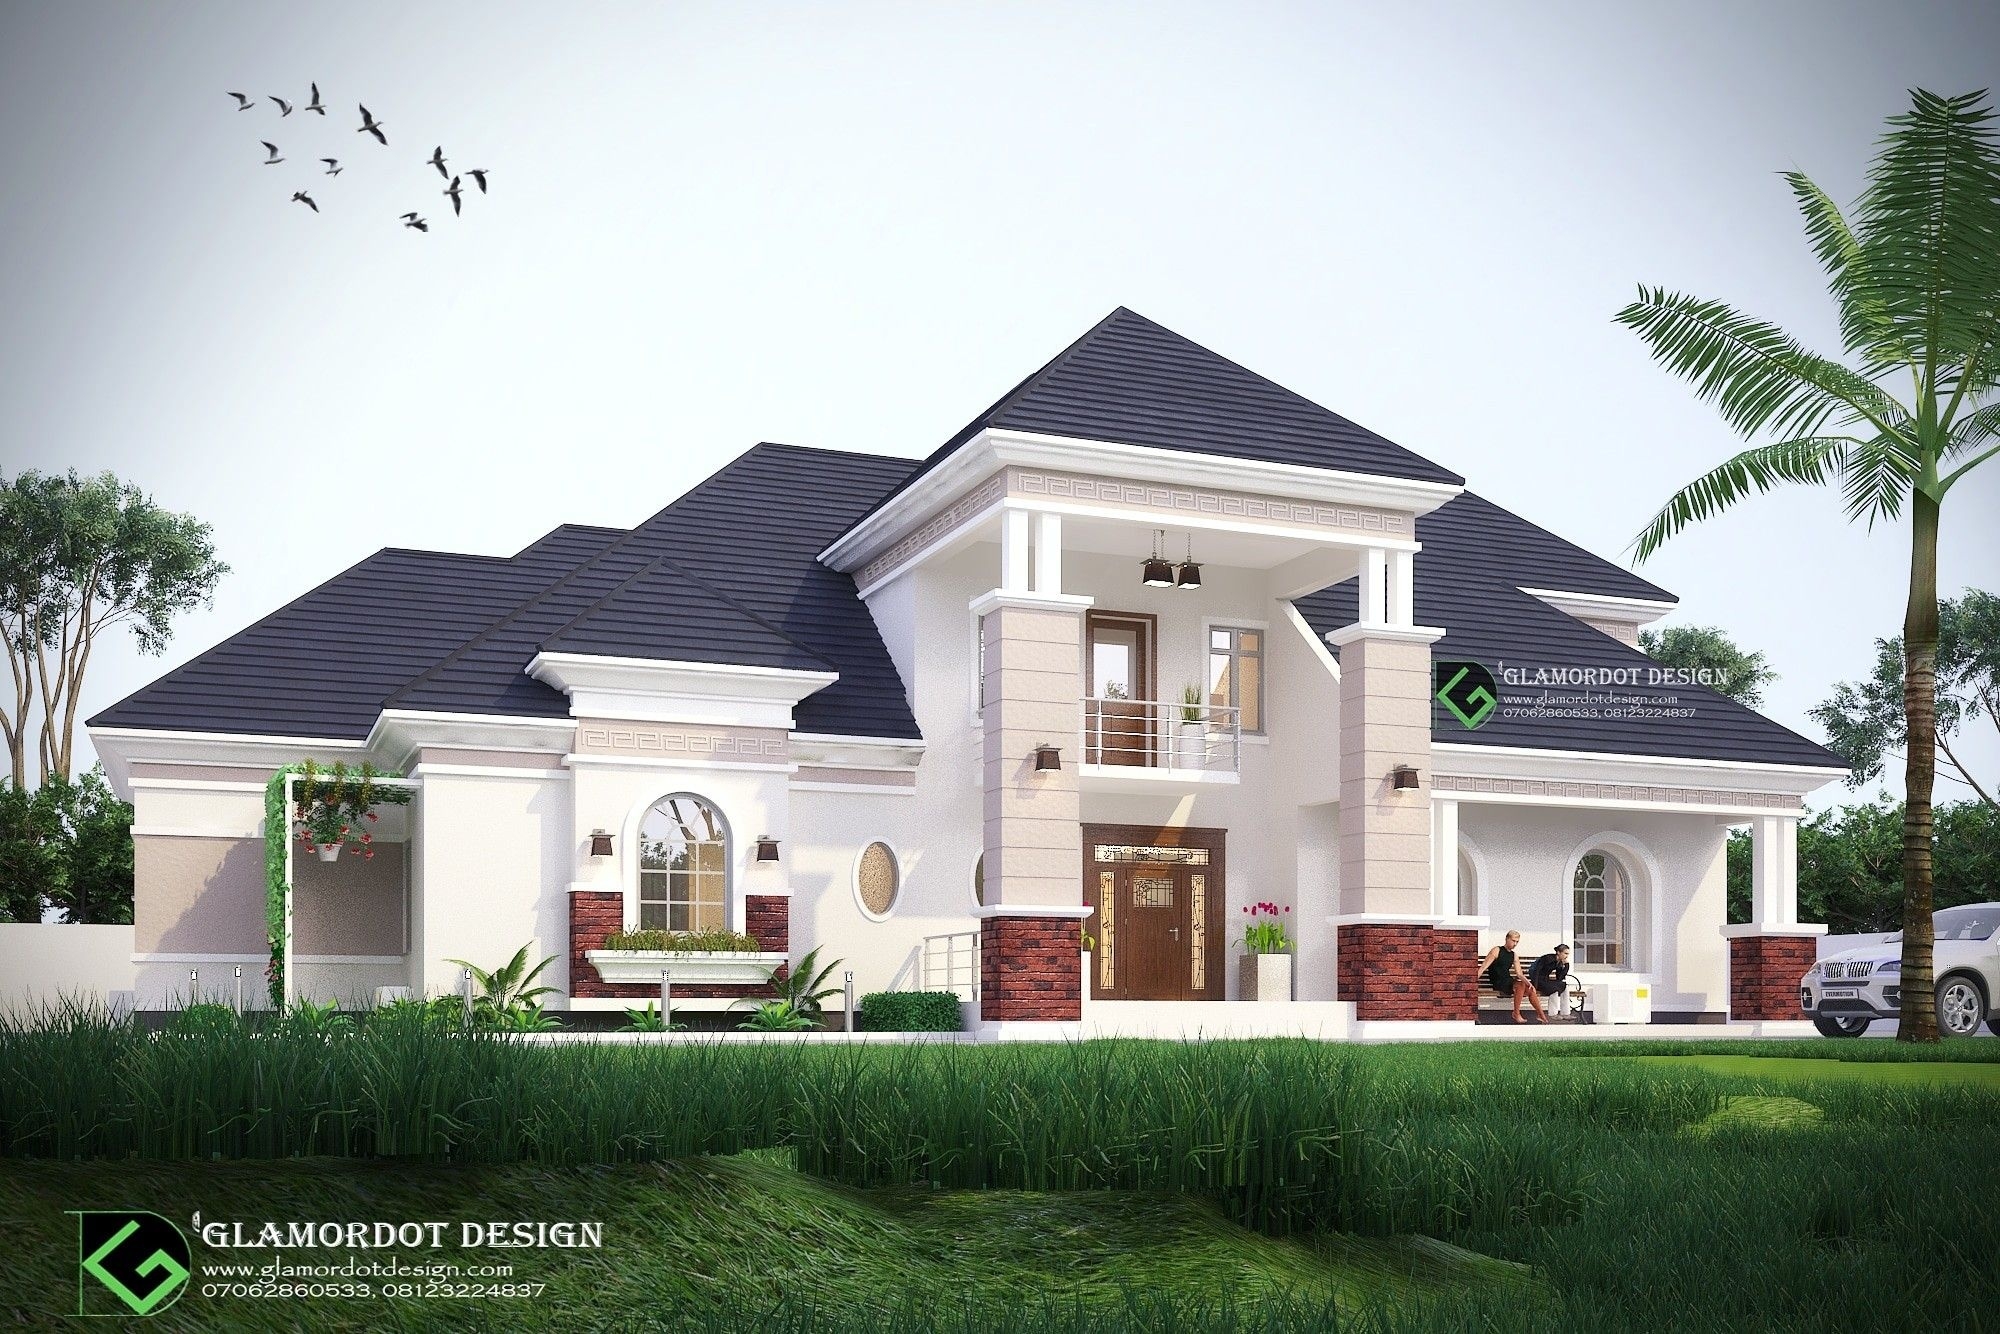 Great modified architectural design of a proposed 5 bedroom bungalow with pertaining to remarkable nigeria house plan design styles